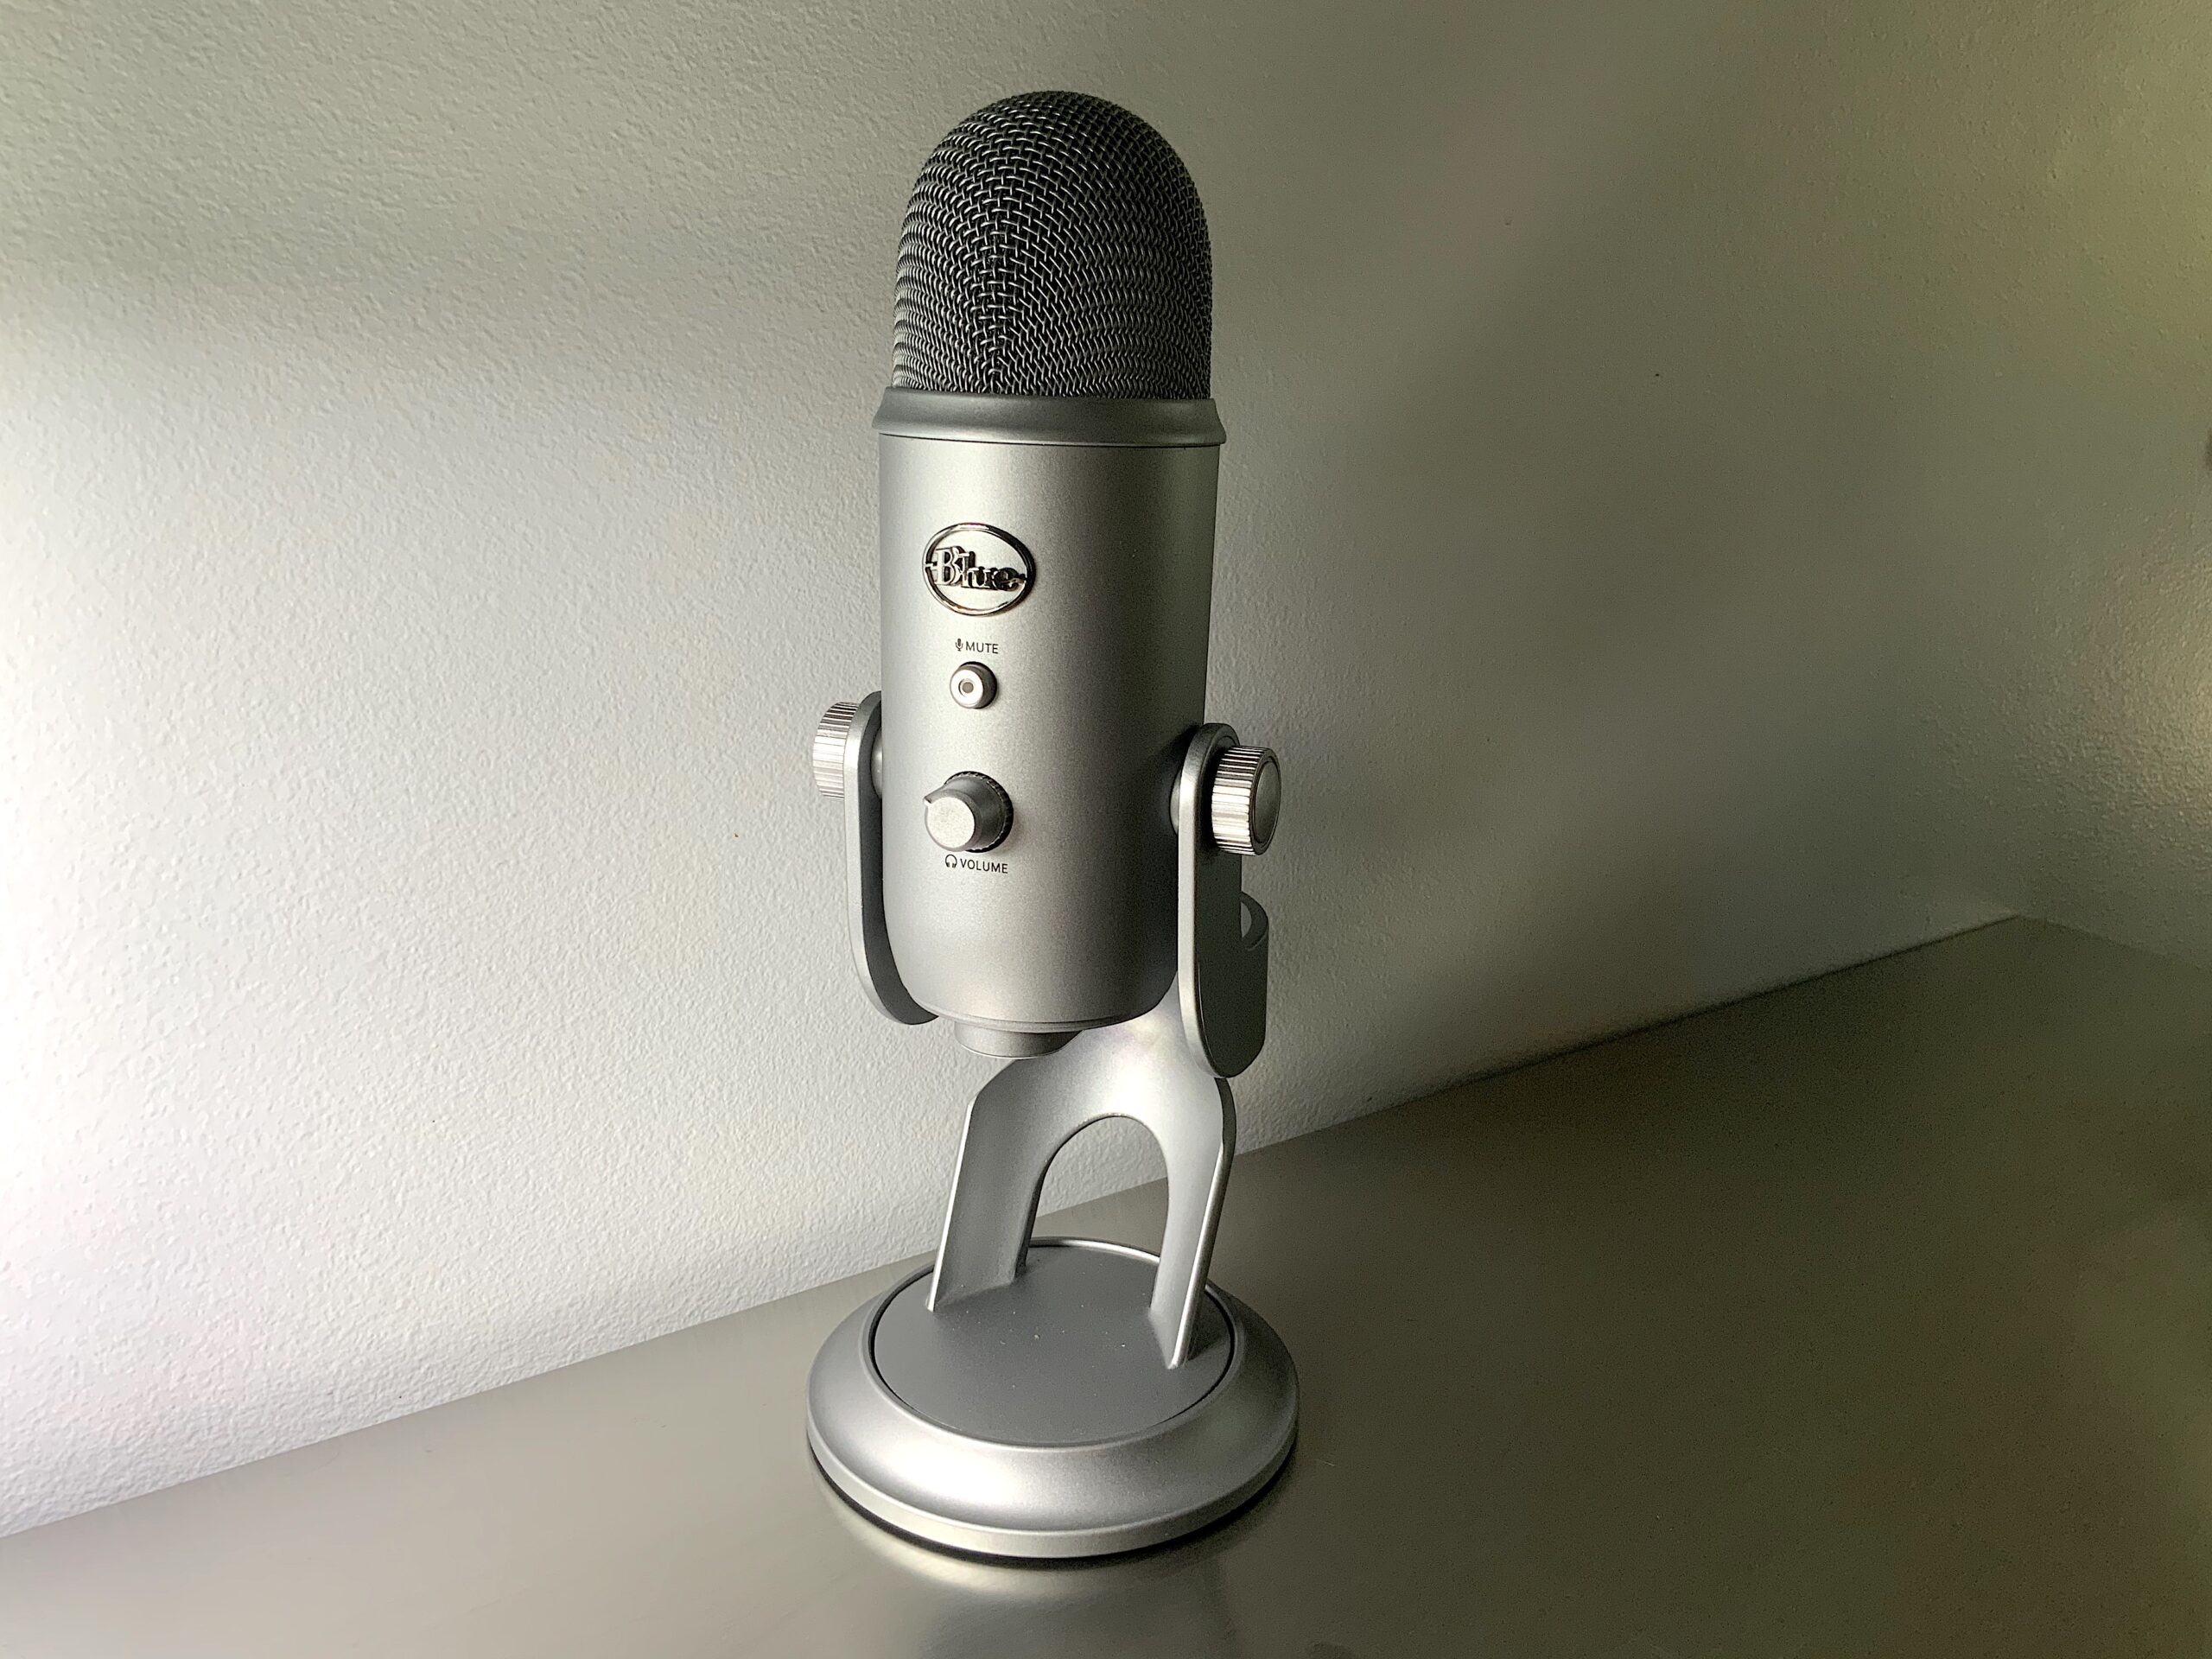 UNBOXING: Blue Yeti BEST STREAMING Microphone + Filter [ LOGITECH